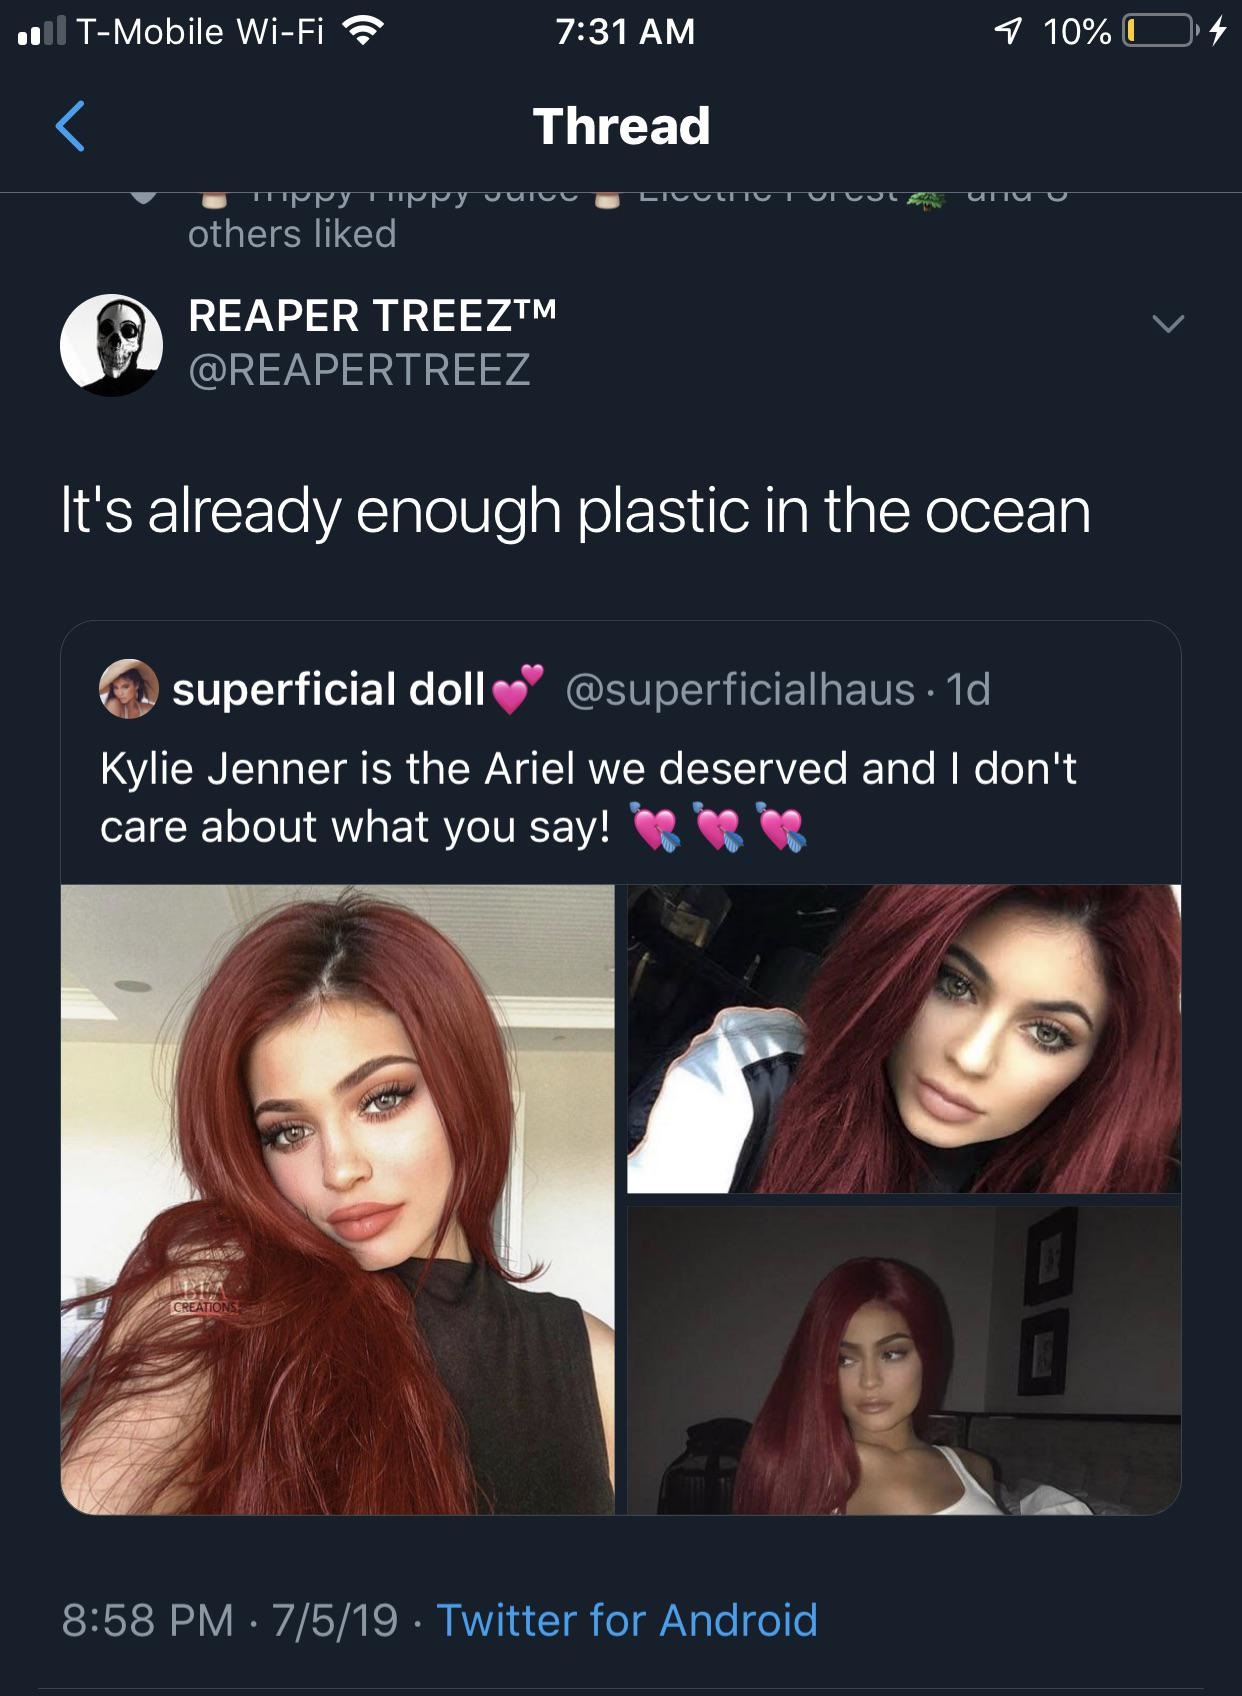 black twitter - It's already enough plastic in the ocean superficial doll 1d Kylie Jenner is the Ariel we deserved and I don't care about what you say! Creations 7519. T